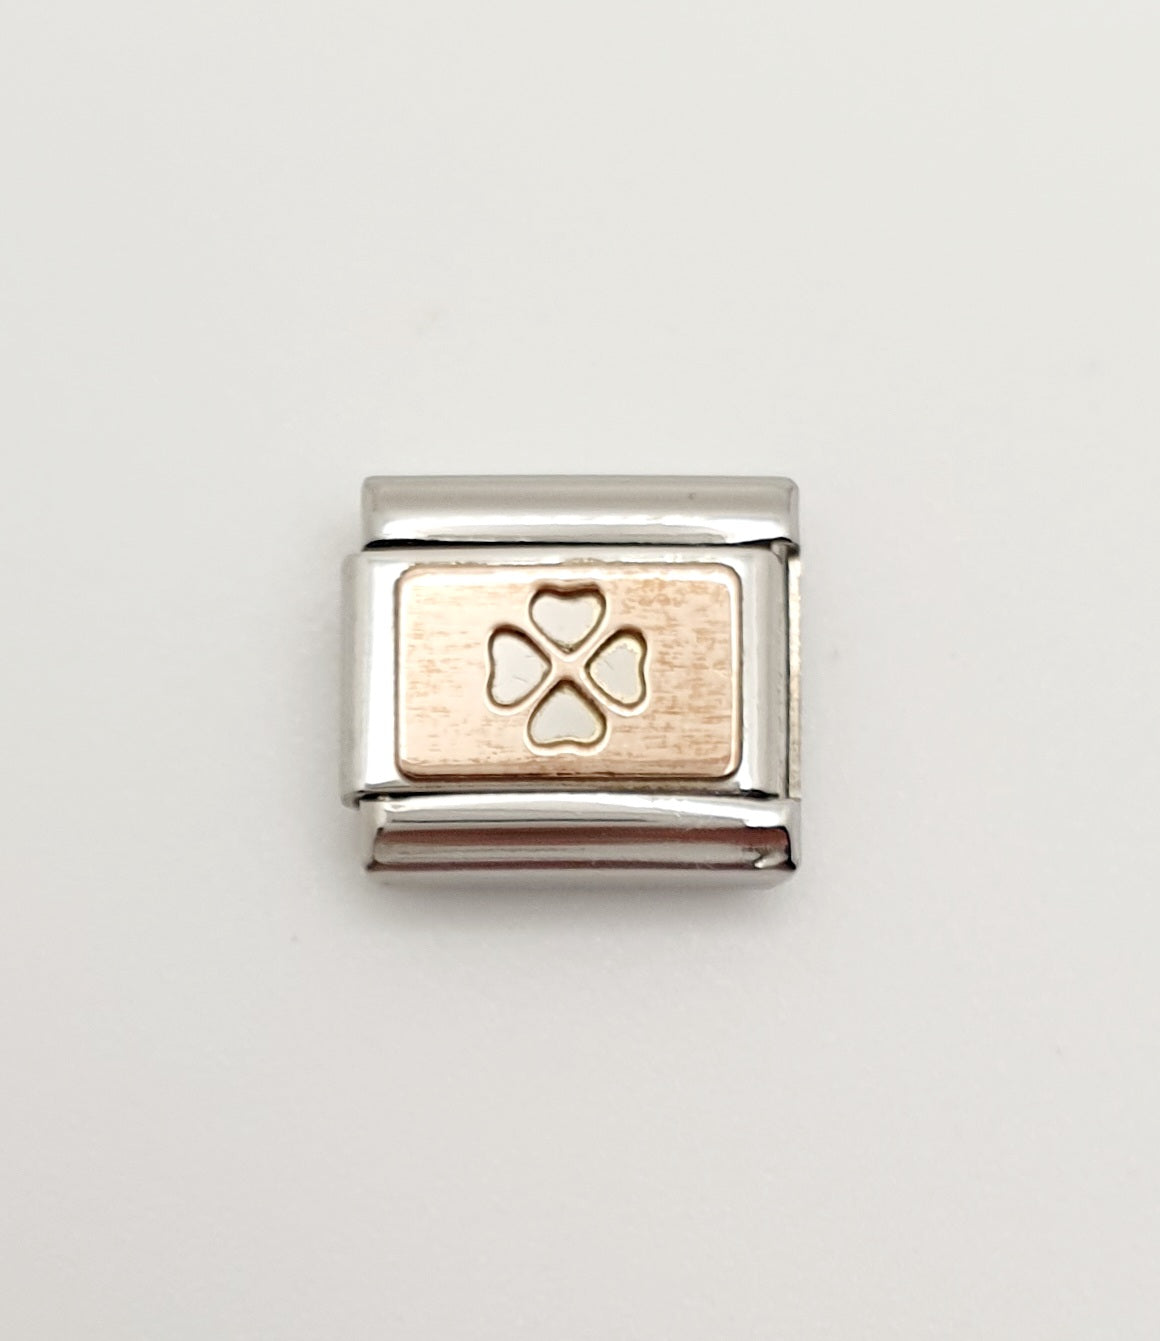 Nomination Charm Link "Clover" Stainless Steel with 9k Rose Gold, 430101 10